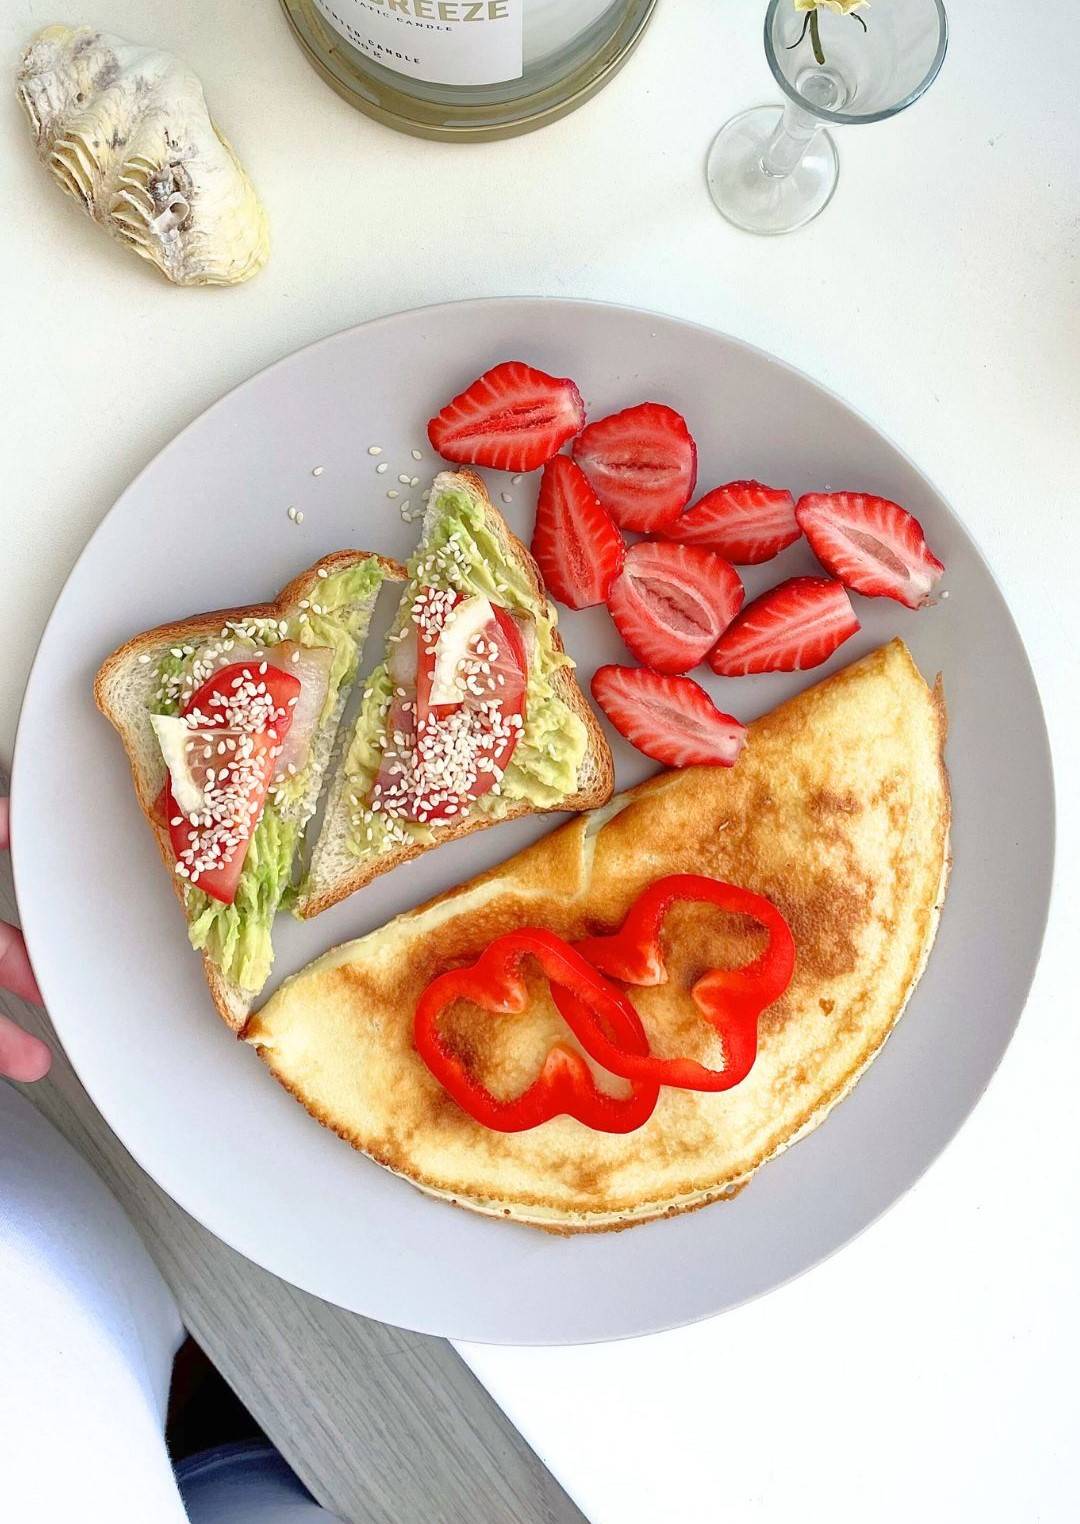 plate of healthy foods, avacado toast, savory crepe and strawberries